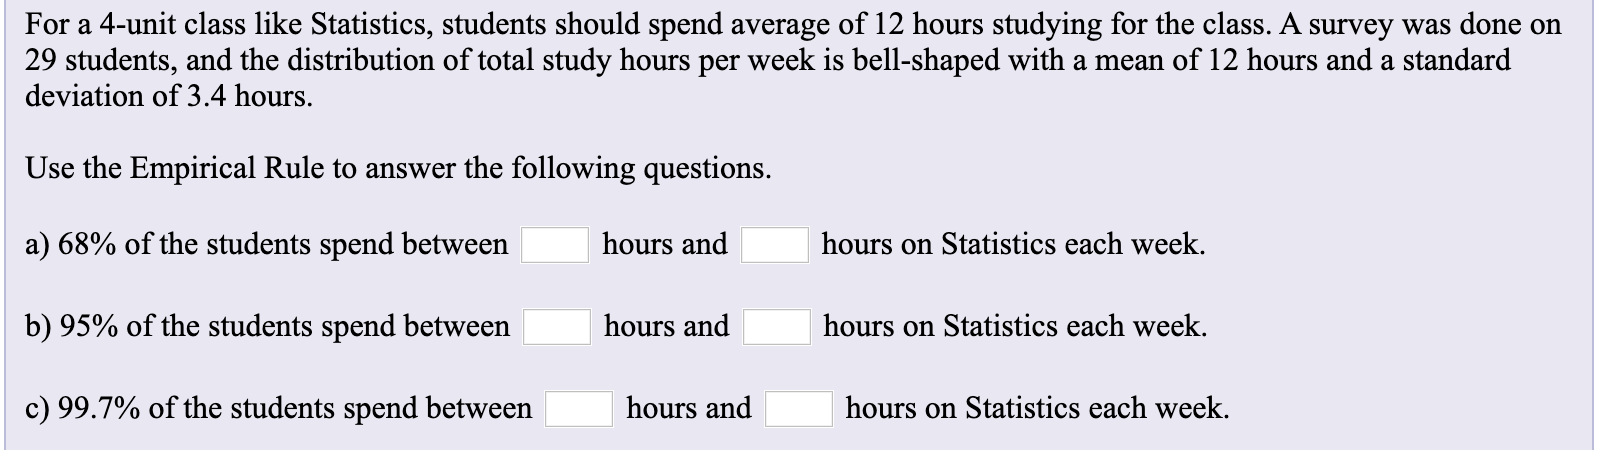 For a 4-unit class like Statistics, students should spend average of 12 hours studying for the class. A survey was done on
29 students, and the distribution of total study hours per week is bell-shaped with a mean of 12 hours and a standard
deviation of 3.4 hours.
Use the Empirical Rule to answer the following questions
a) 68% of the students spend between
hours and
hours on Statistics each week.
hours on Statistics each week
b) 95% of the students spend between
hours and
c) 99.7% of the students spend between
hours and
hours on Statistics each week.
